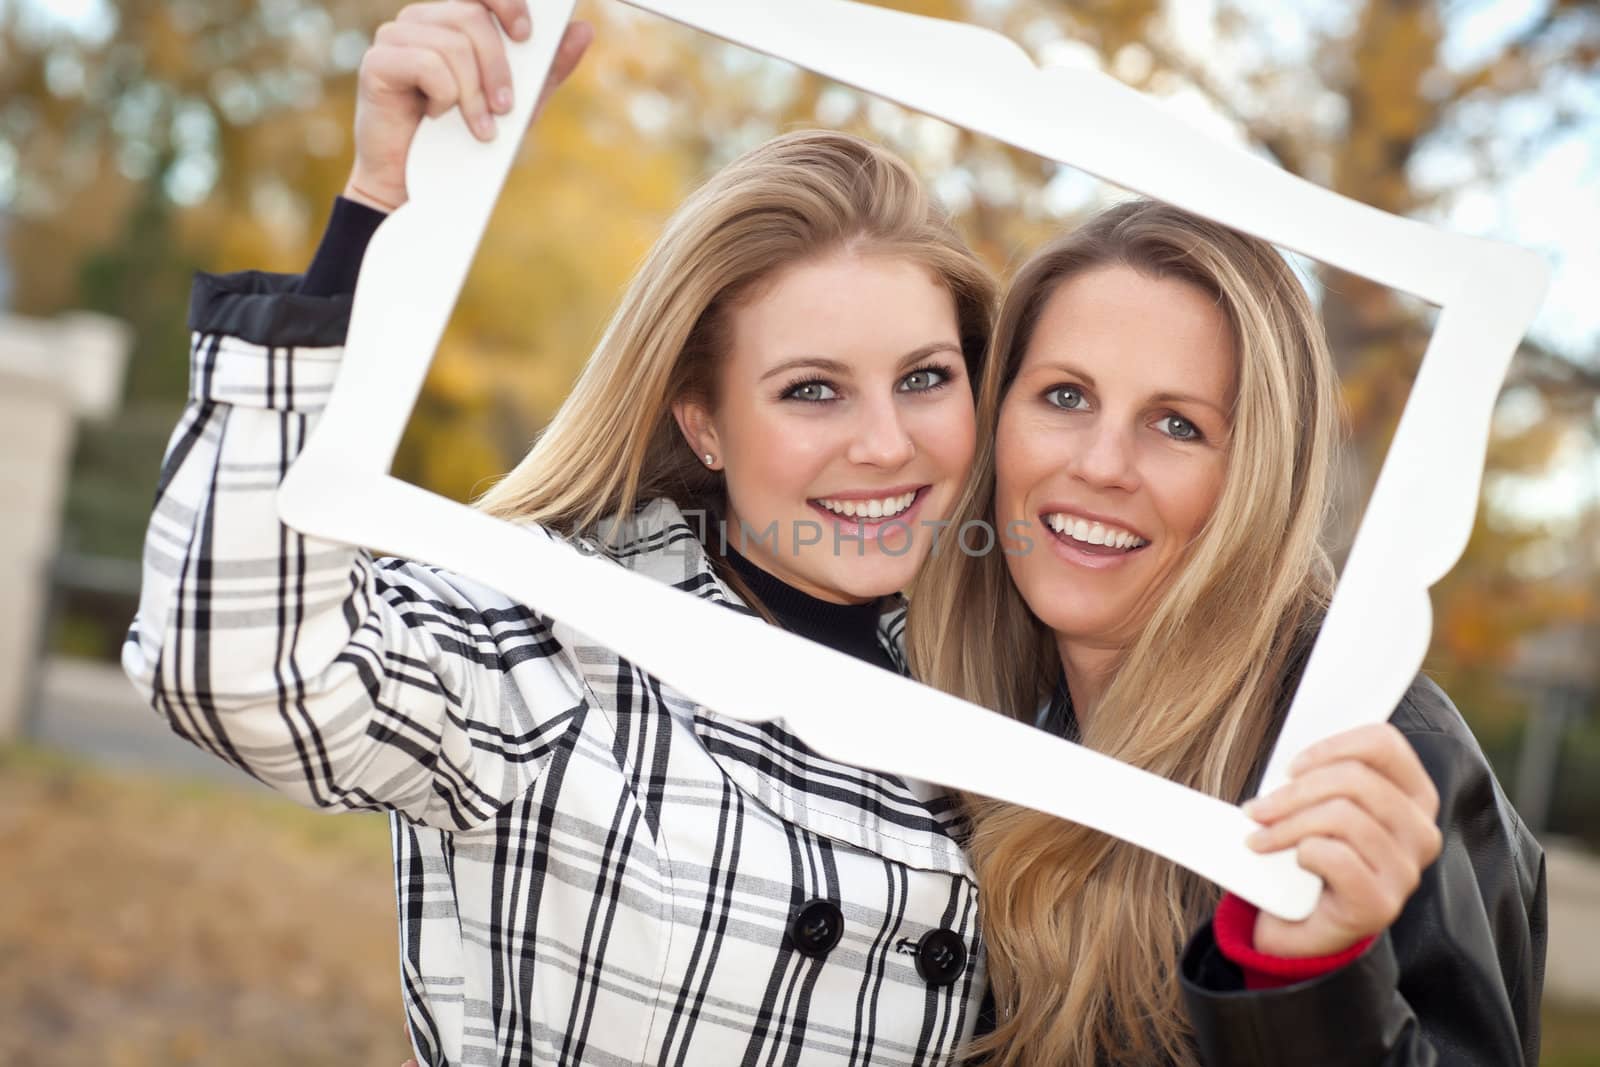 Pretty Mother and Daughter Portrait in Park with Frame by Feverpitched